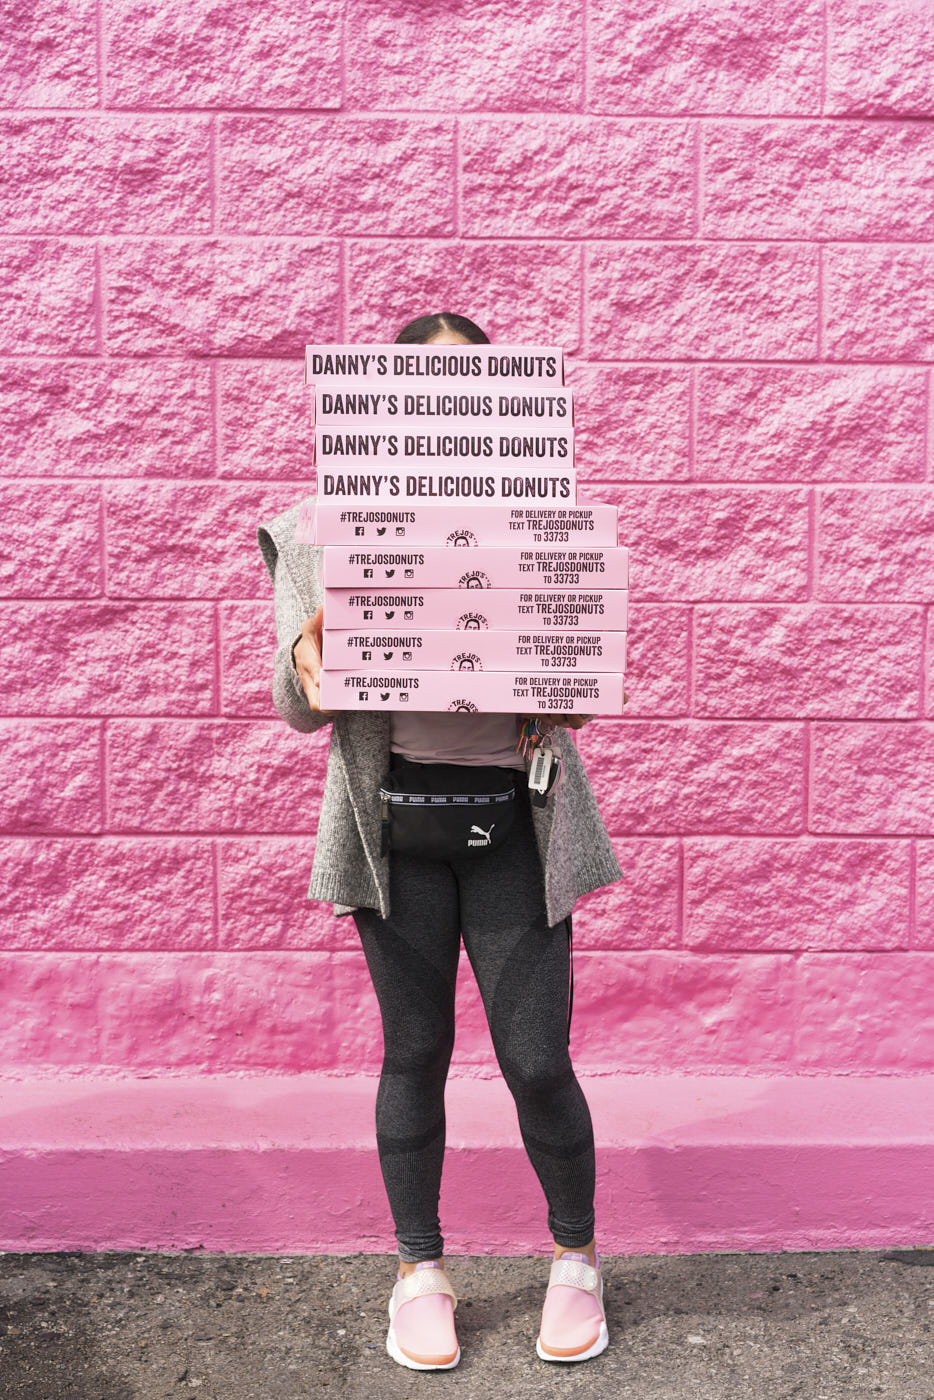 Woman holding pink donuts boxes against a pink wall